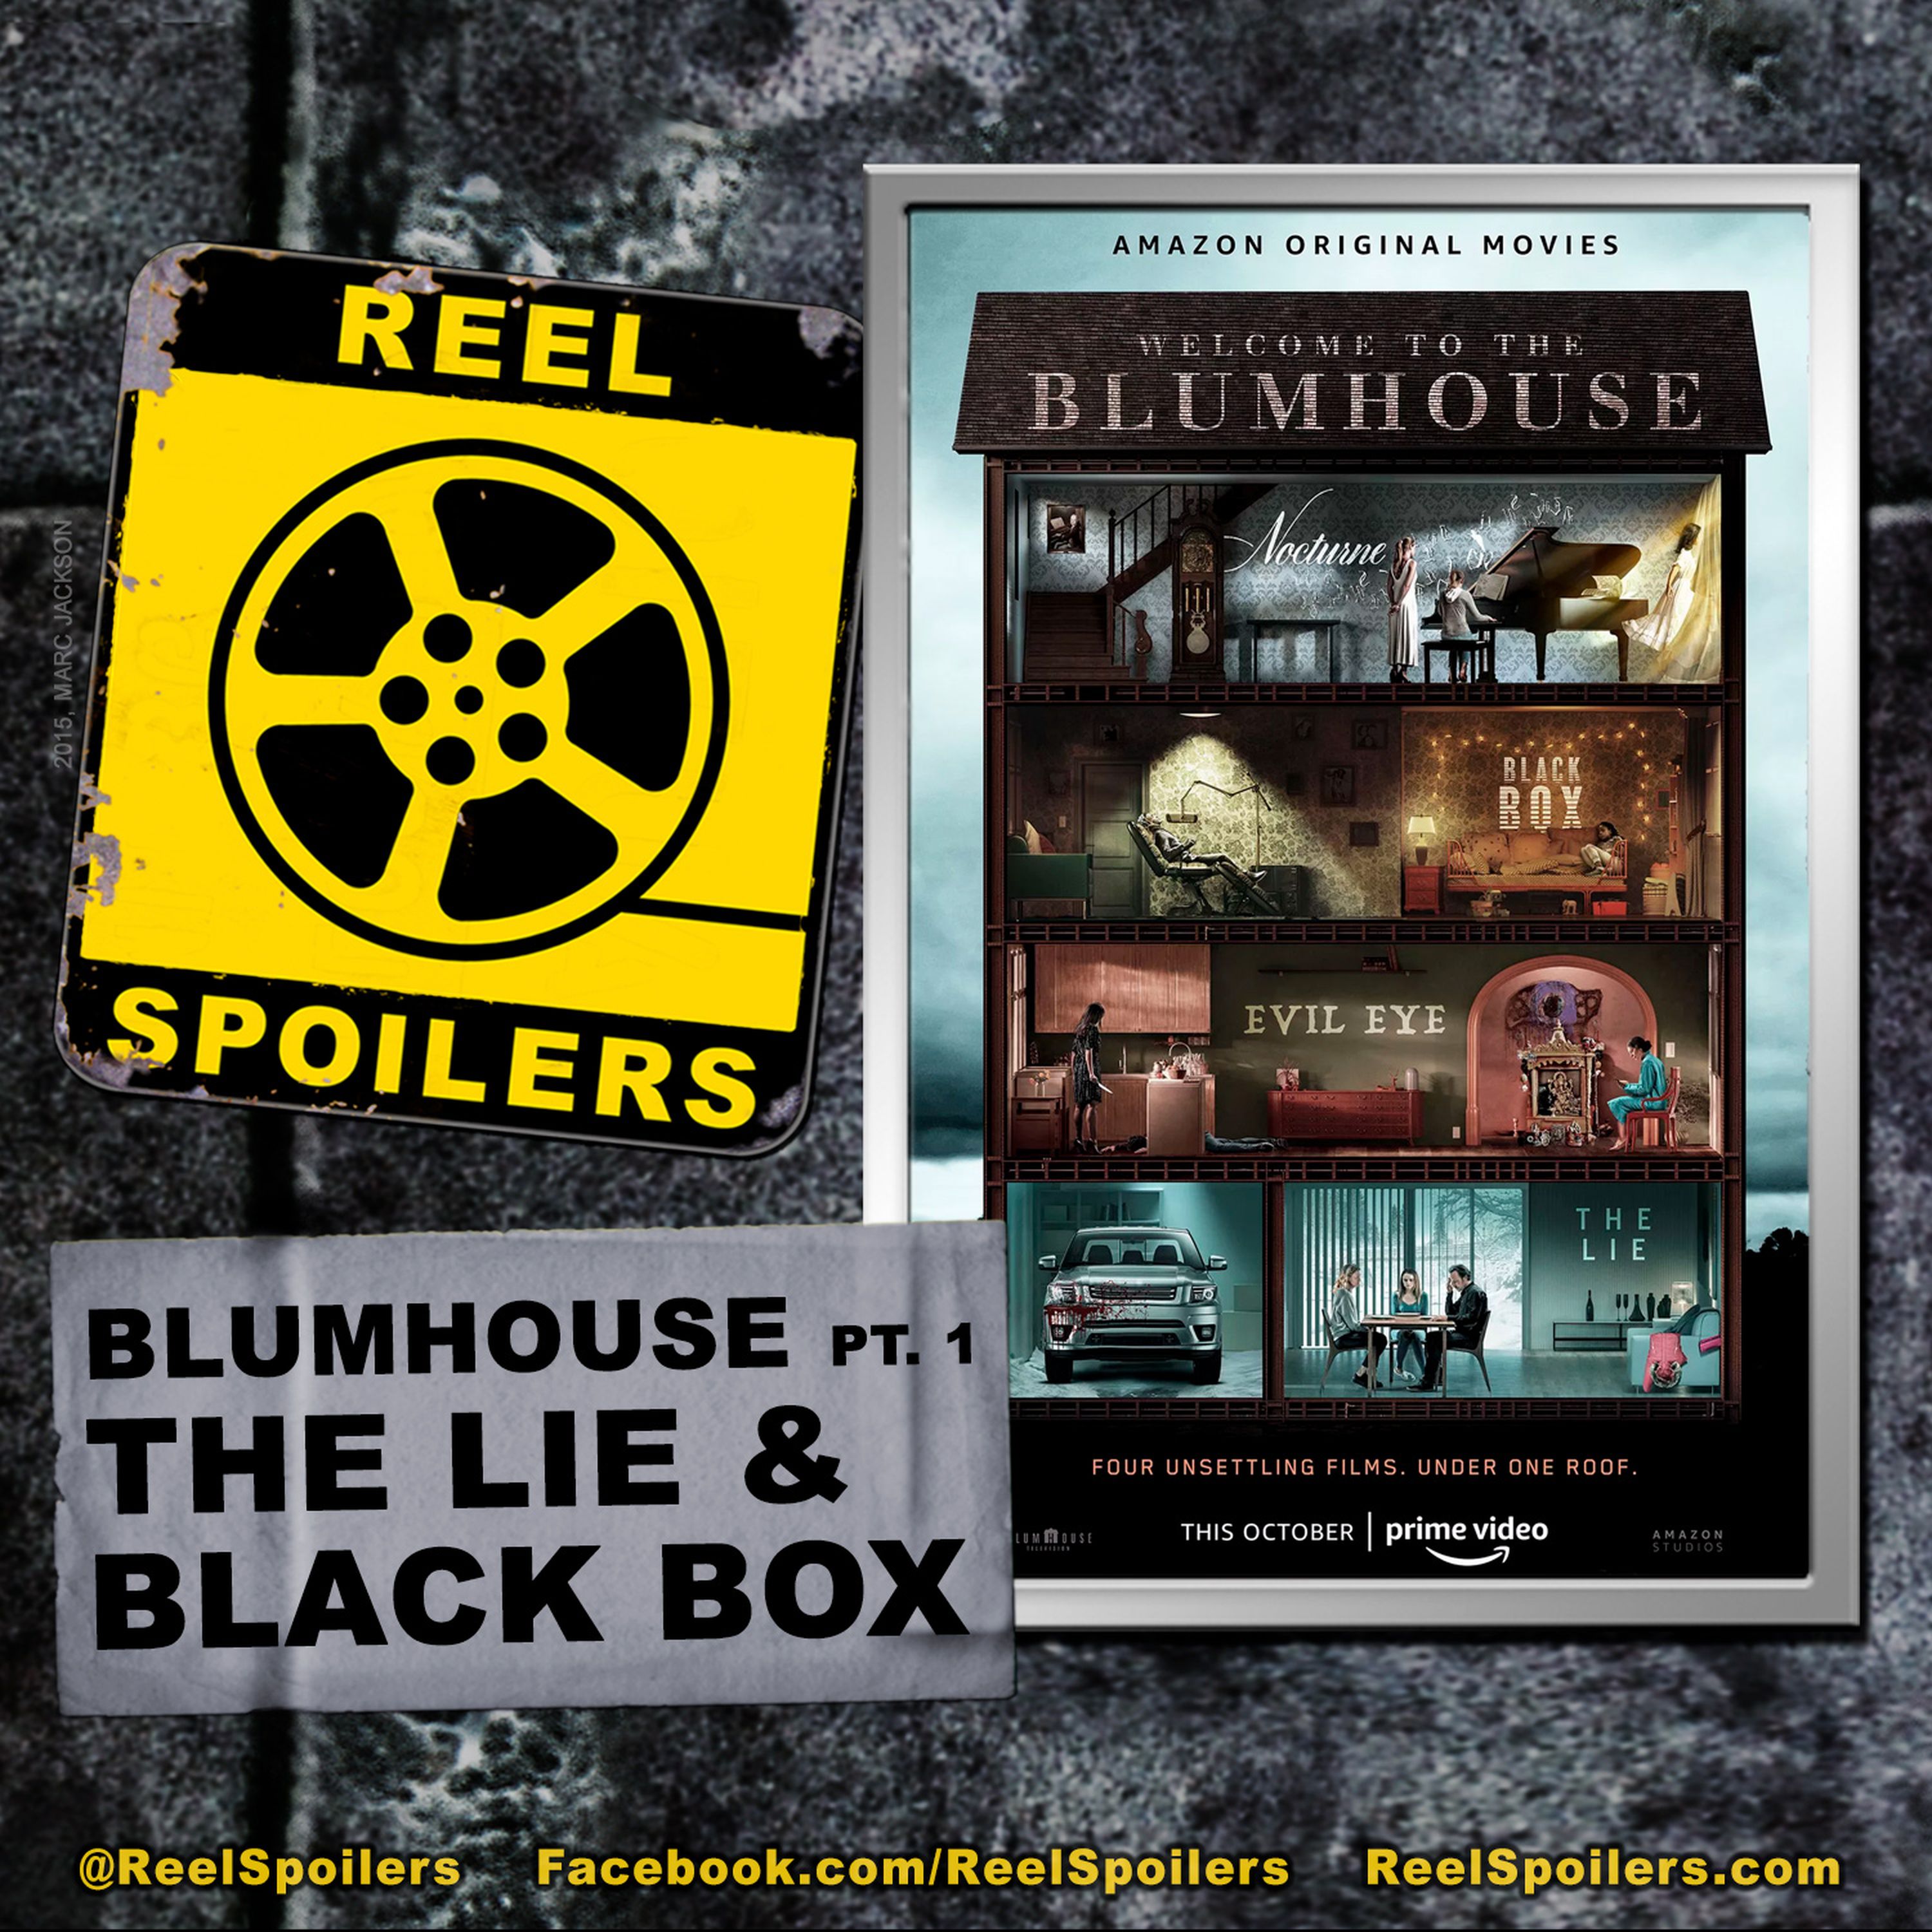 Welcome to the Blumhouse Pt. 1: THE LIE and BLACK BOX Image